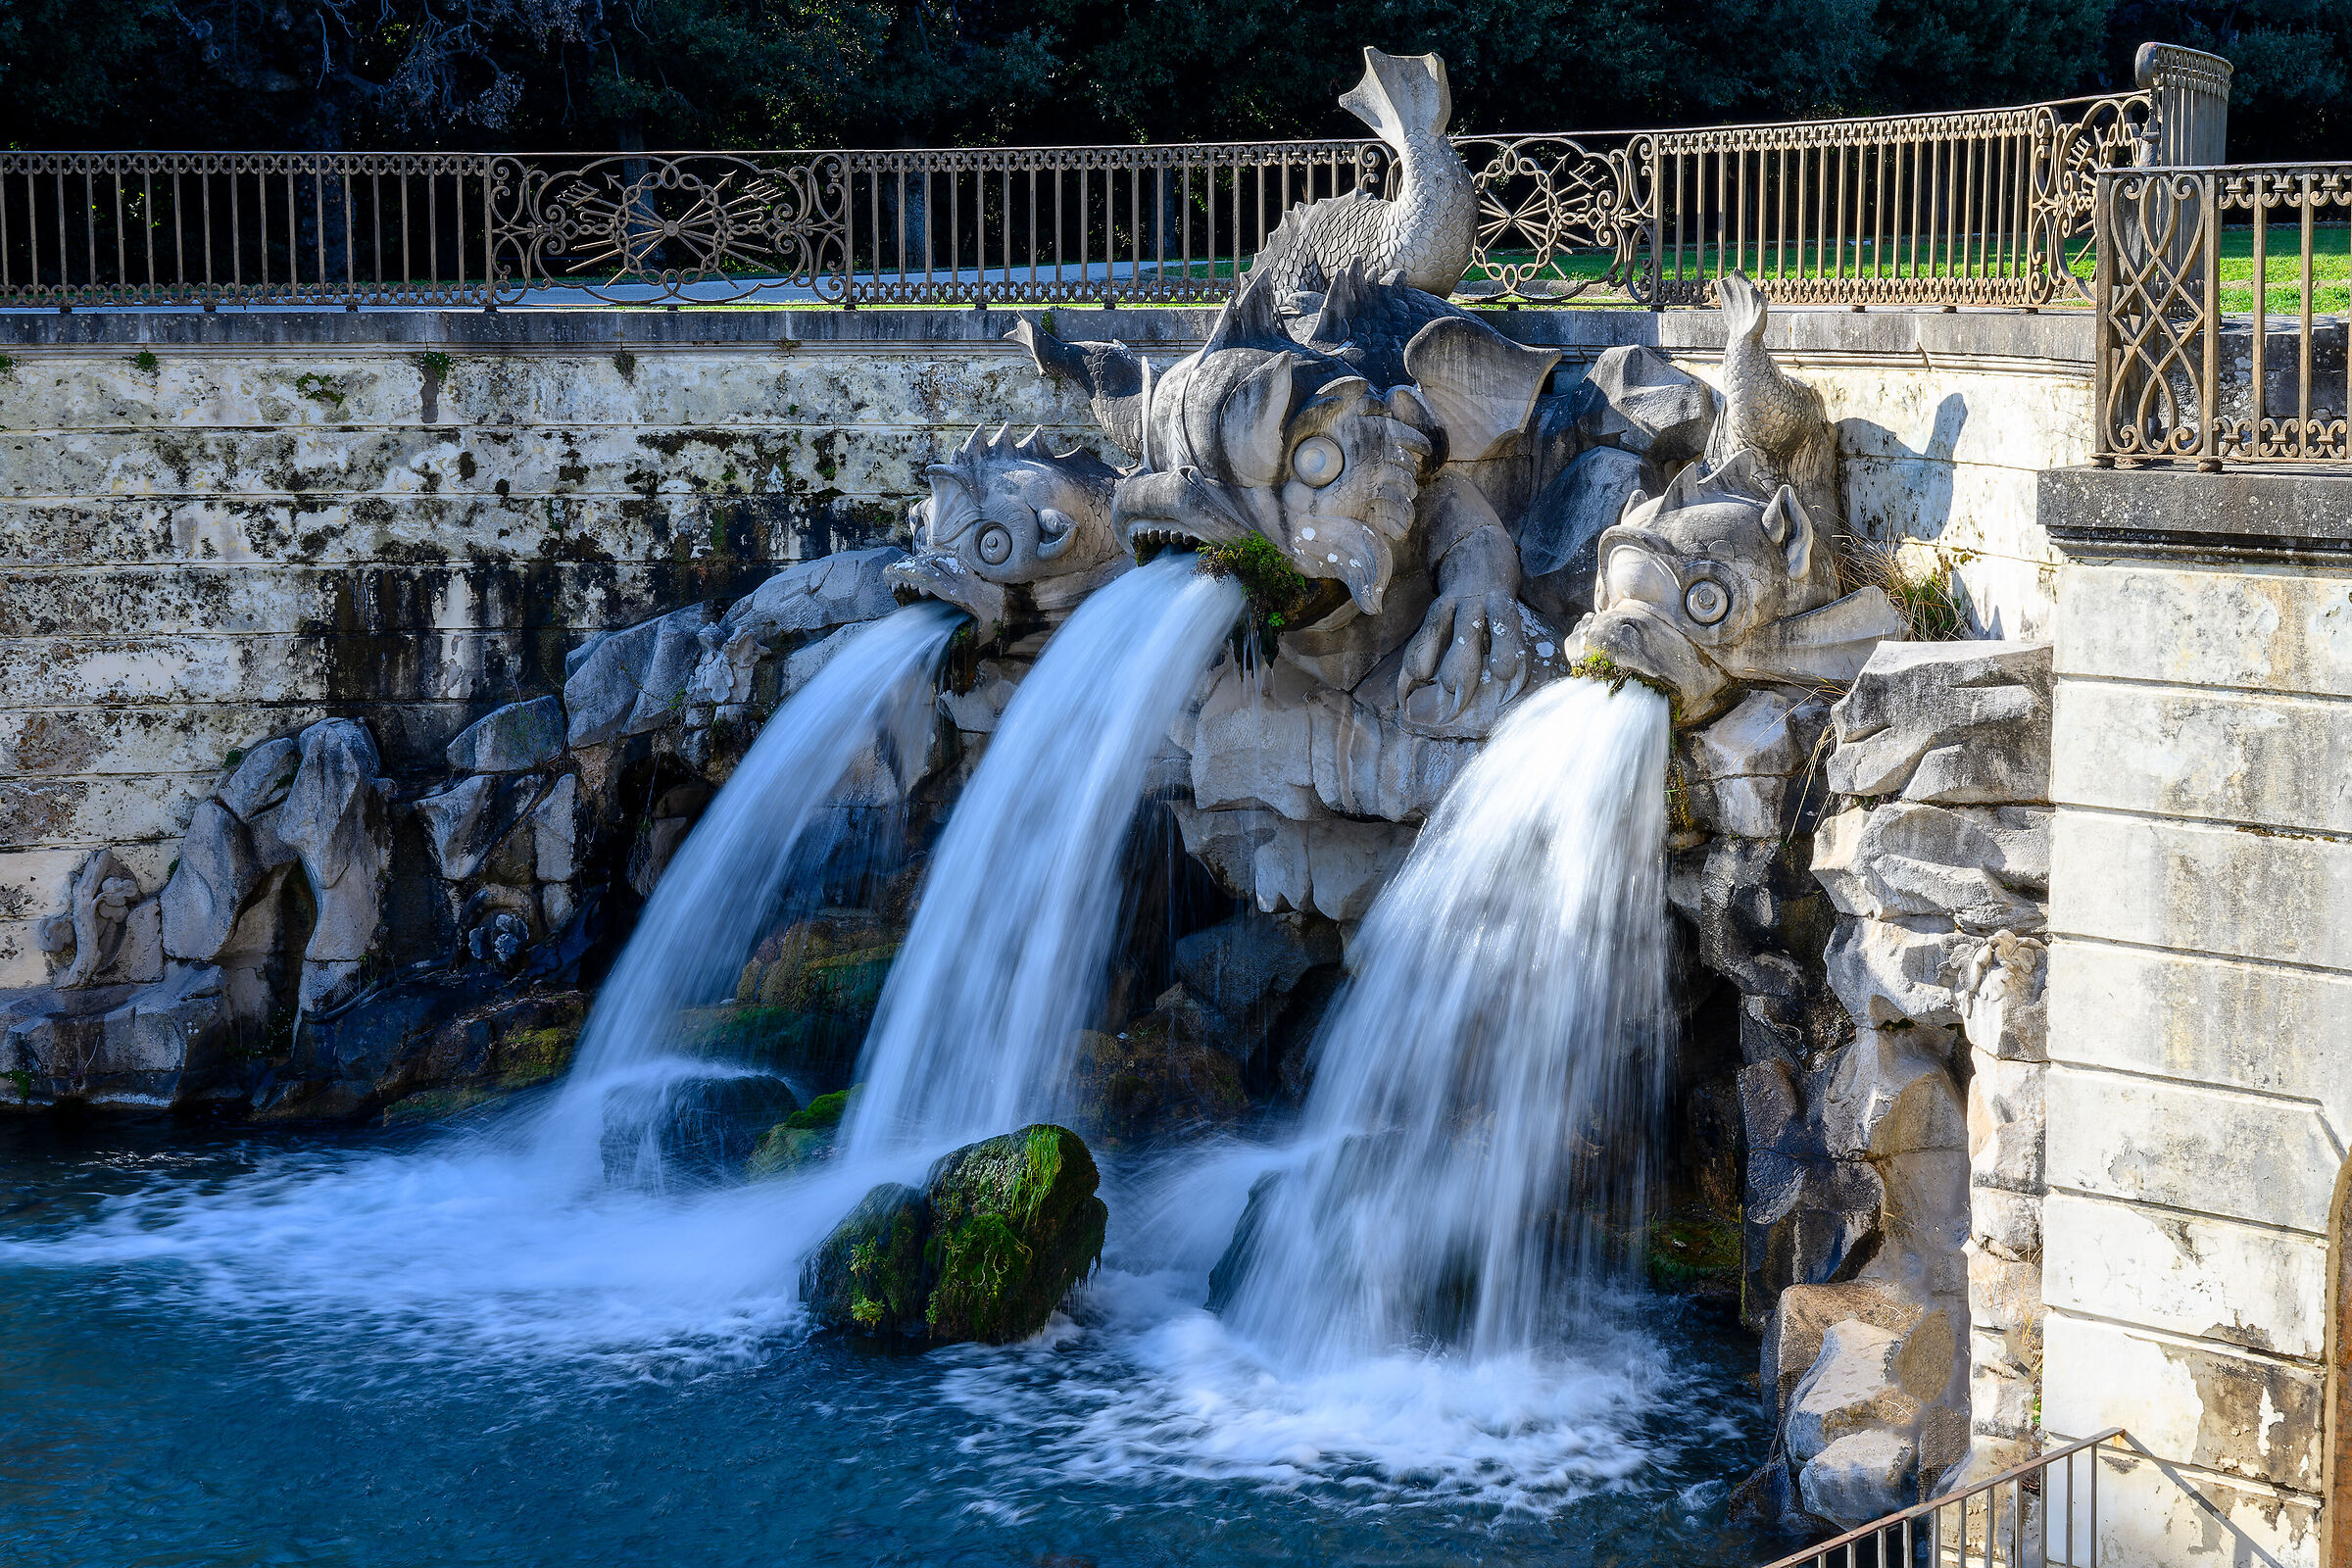 Royal Palace of Caserta - Fountain of the Dolphins...